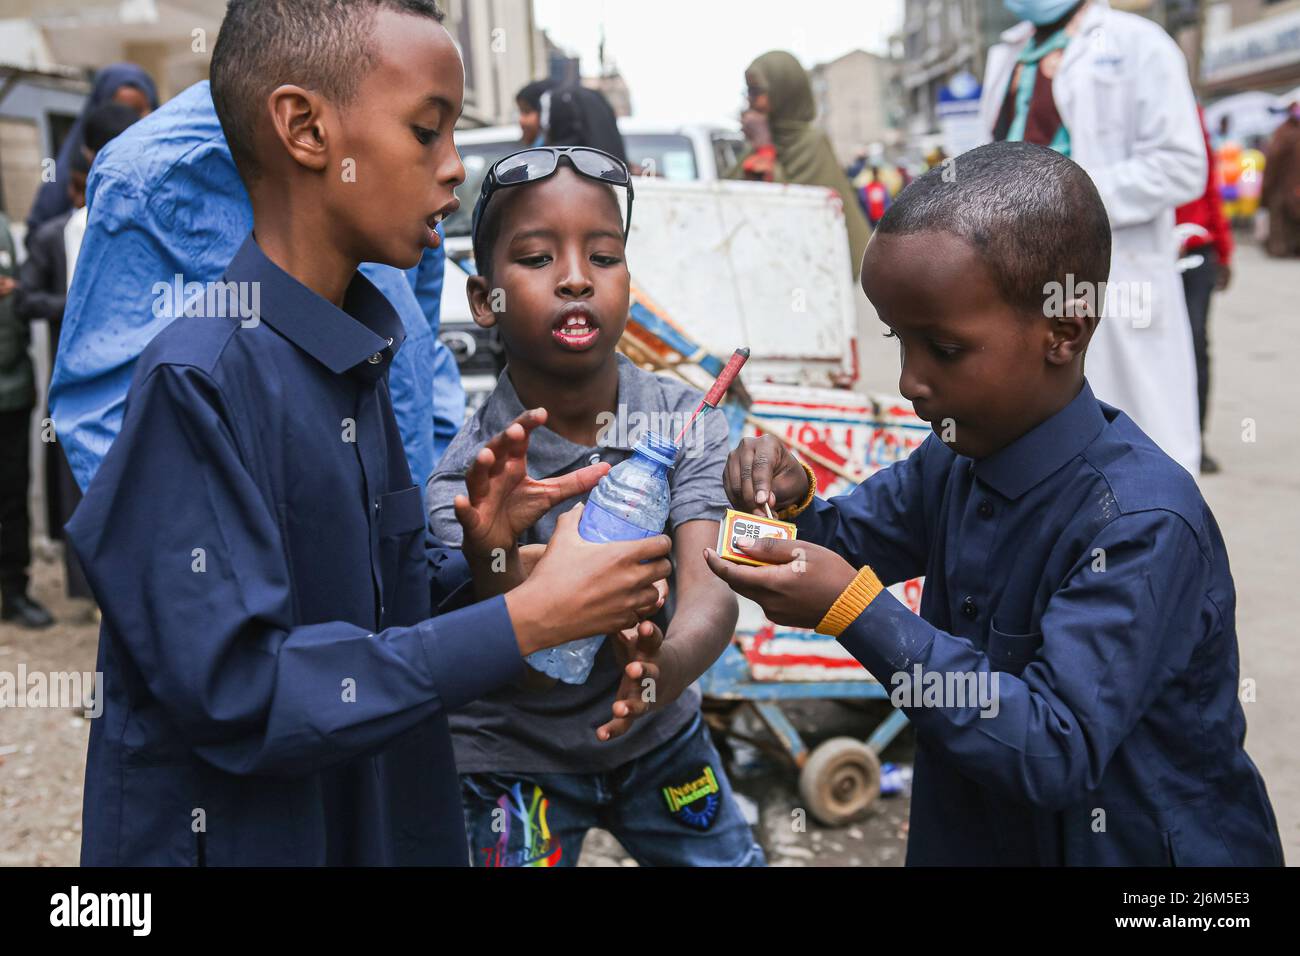 Kenyan Somali children light up fireworks at Jackson Muriethi street in Eastleigh, during Eid-Ul-Fitr celebrations. Muslims in Kenya celebrate Eid-Ul-Fitr which marks the end of the Holy month of Ramadhan. Stock Photo